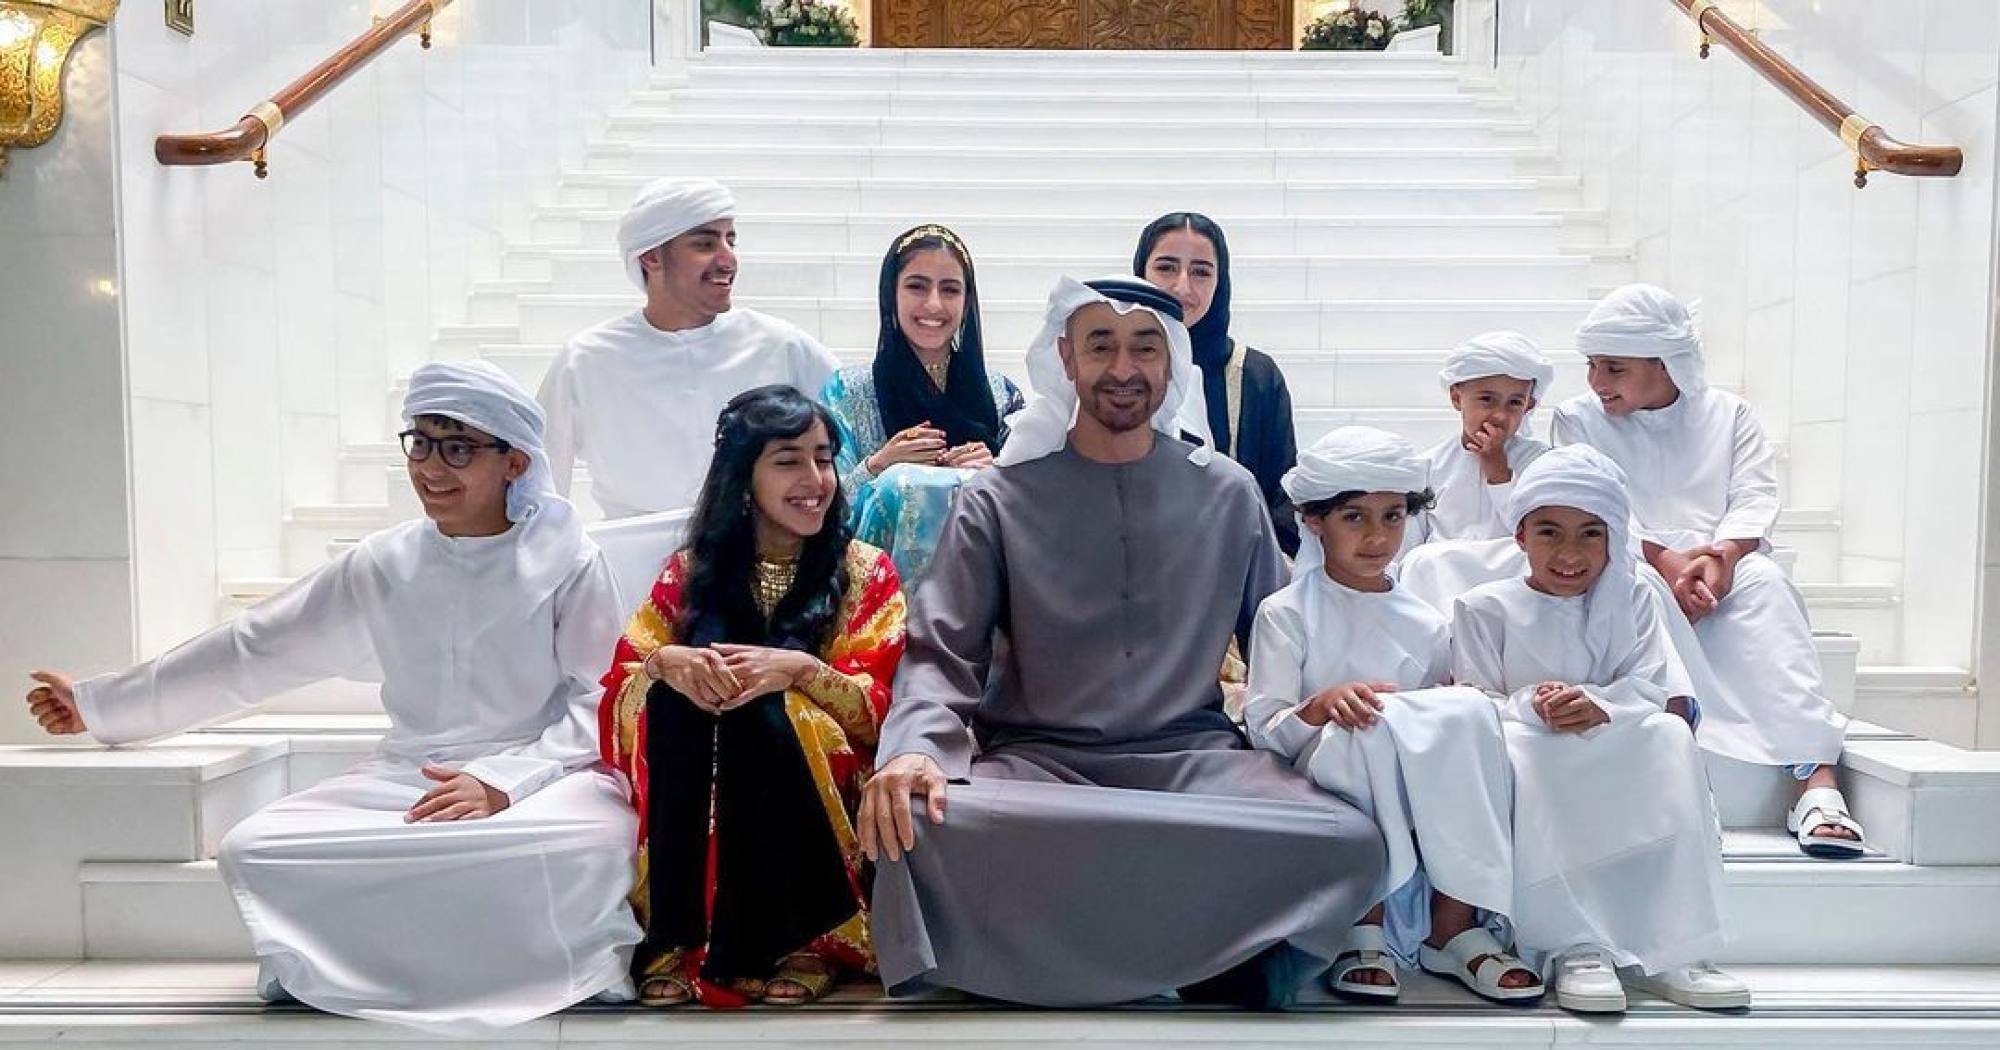 Abu Dhabi’s Sheikh Mohammed bin Zayed Al Nahyan and the royal family. Photo: @mohamedbinzayed/Instagram